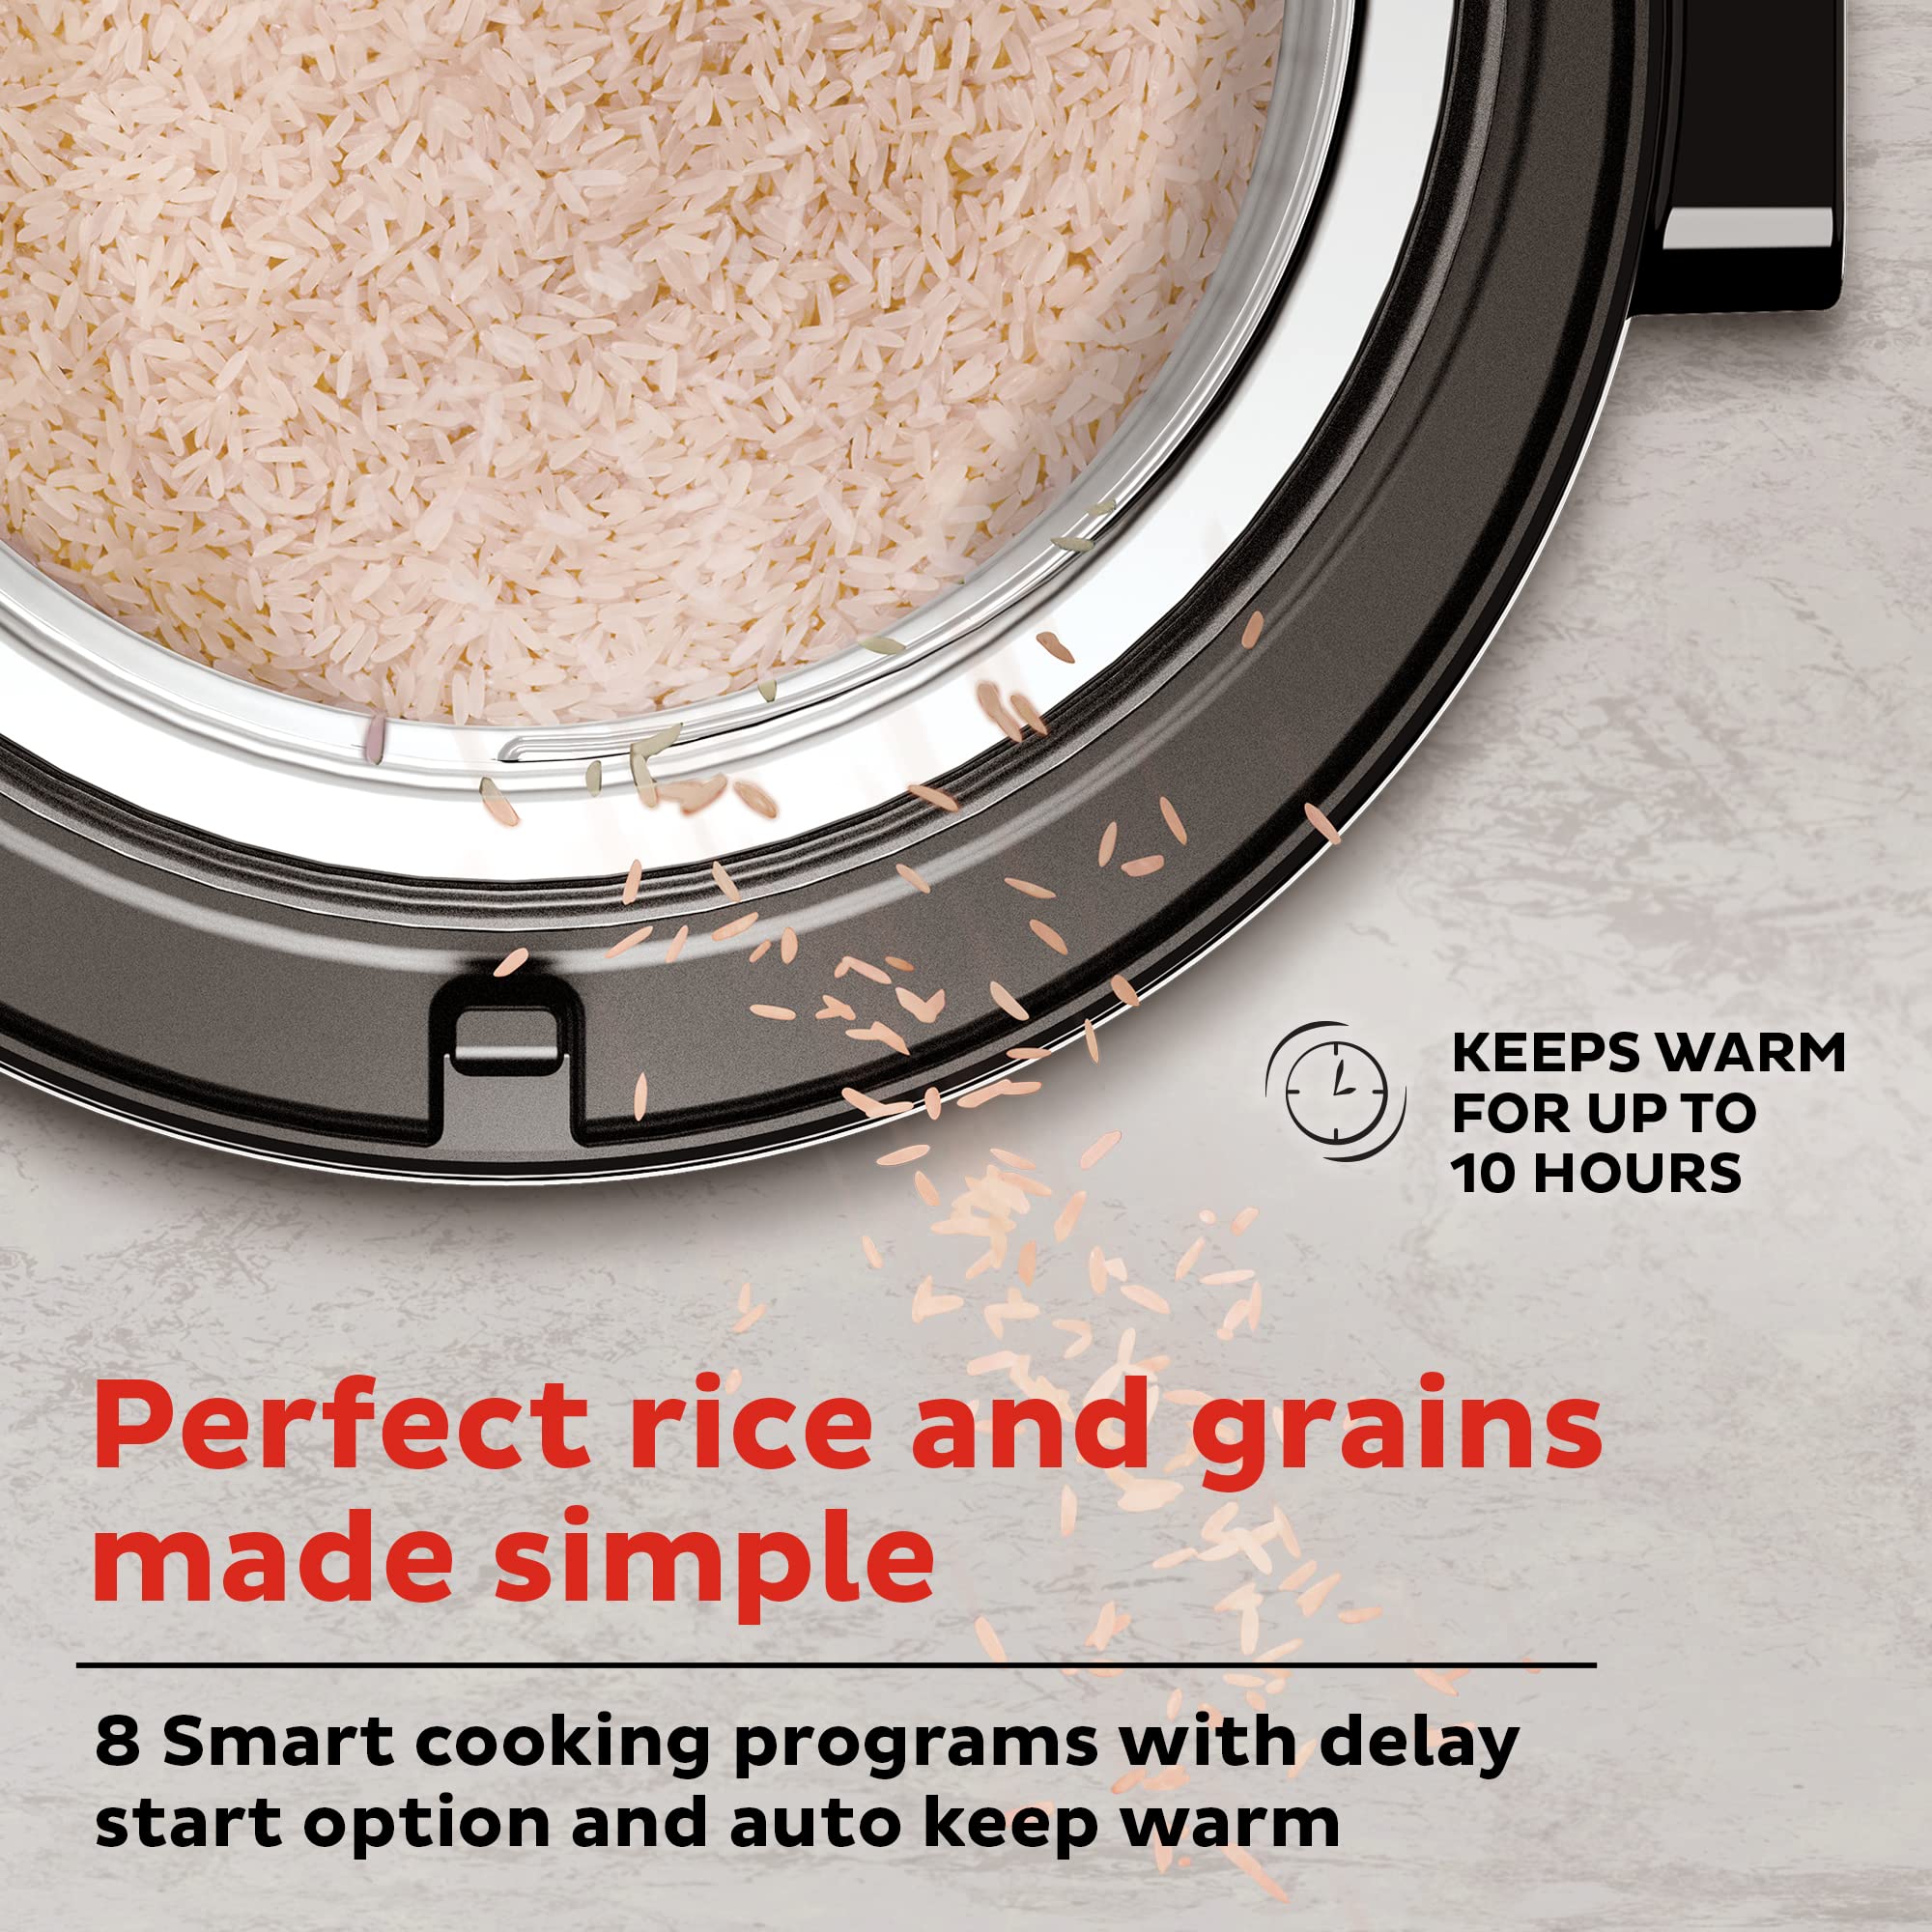 Instant 20-Cup Rice Cooker, Rice and Grain Multi-Cooker with Carb Reducing Technology without Compromising Taste or Texture, From the Makers of Instant Pot, Includes 8 Cooking Presets